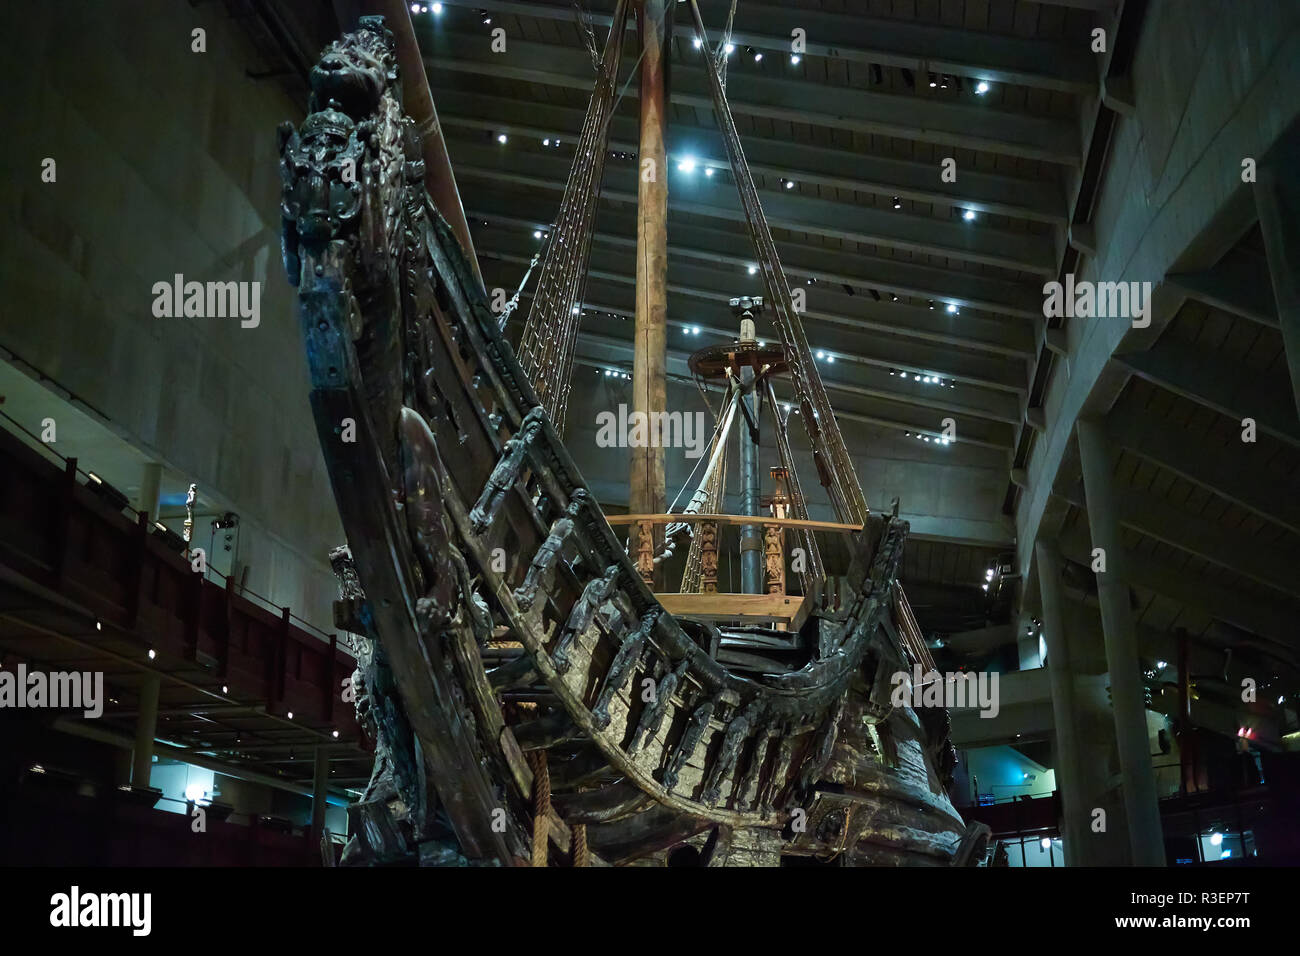 Stockholm, Swden - Novemer 6, 2018. Visit of The Vasa ship in Vasa Museum in Stockholm. Details and exterior of the ship Stock Photo